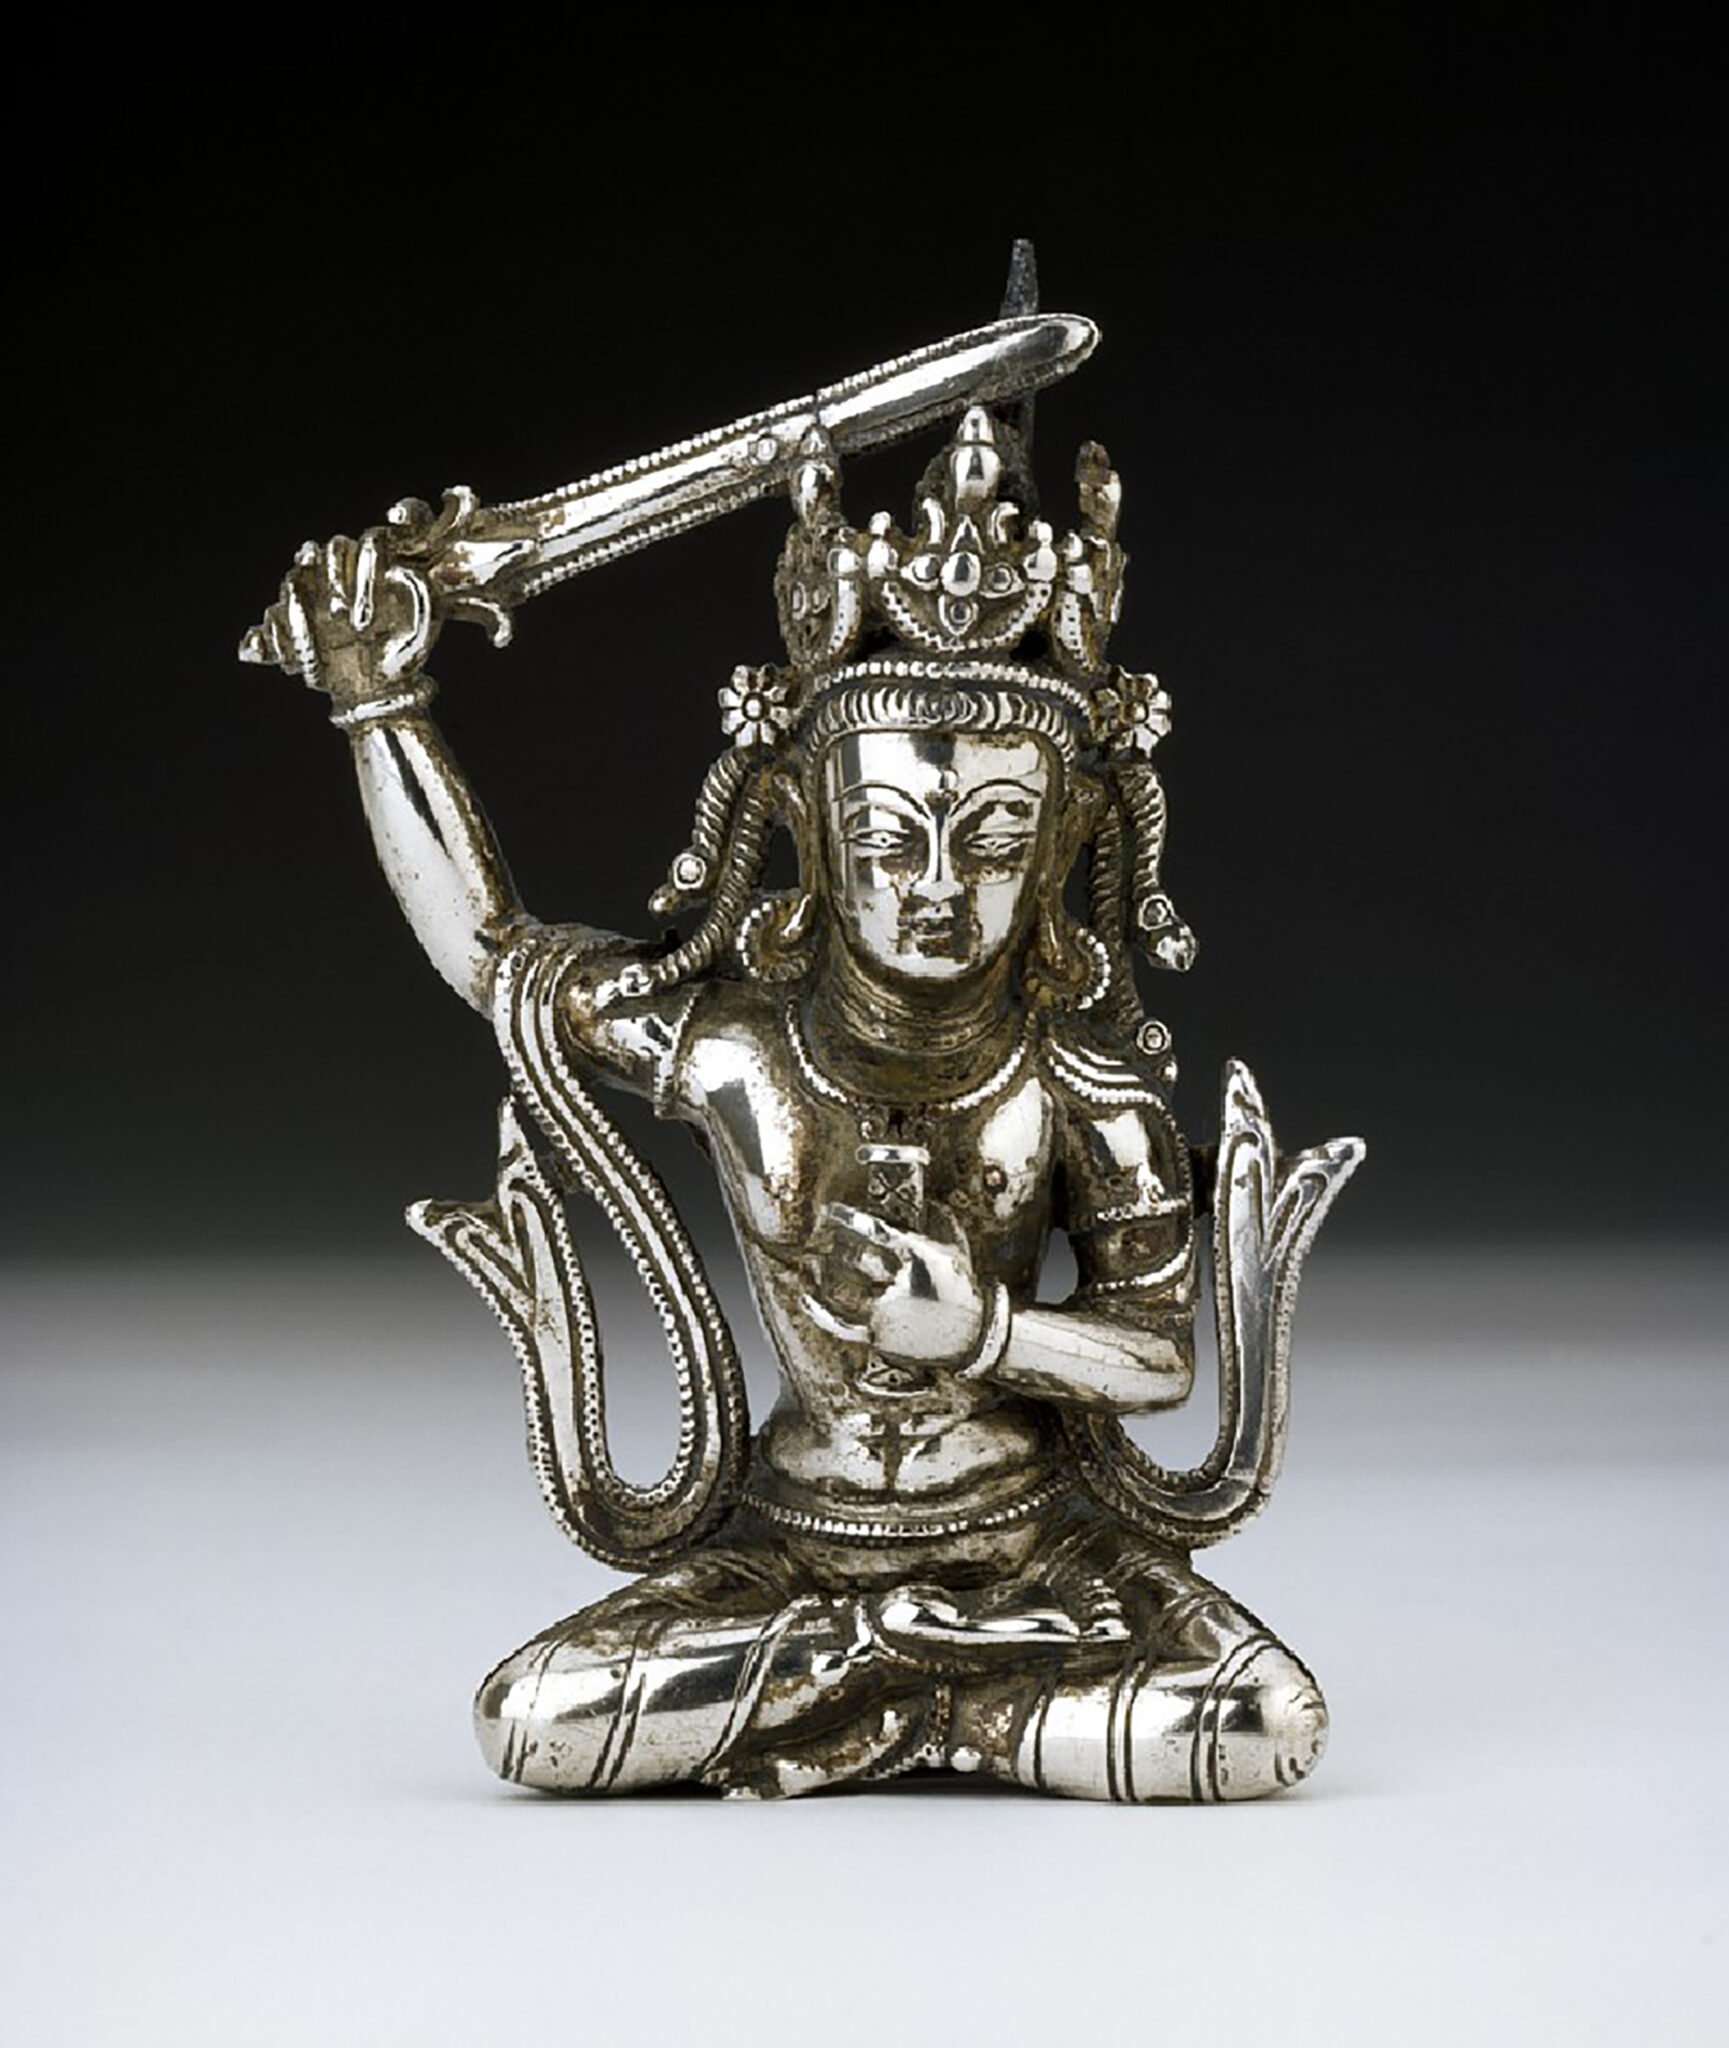 Silver statuette of seated, crowned Bodhisattva, left arm raising sword, with sash billowing about shoulders